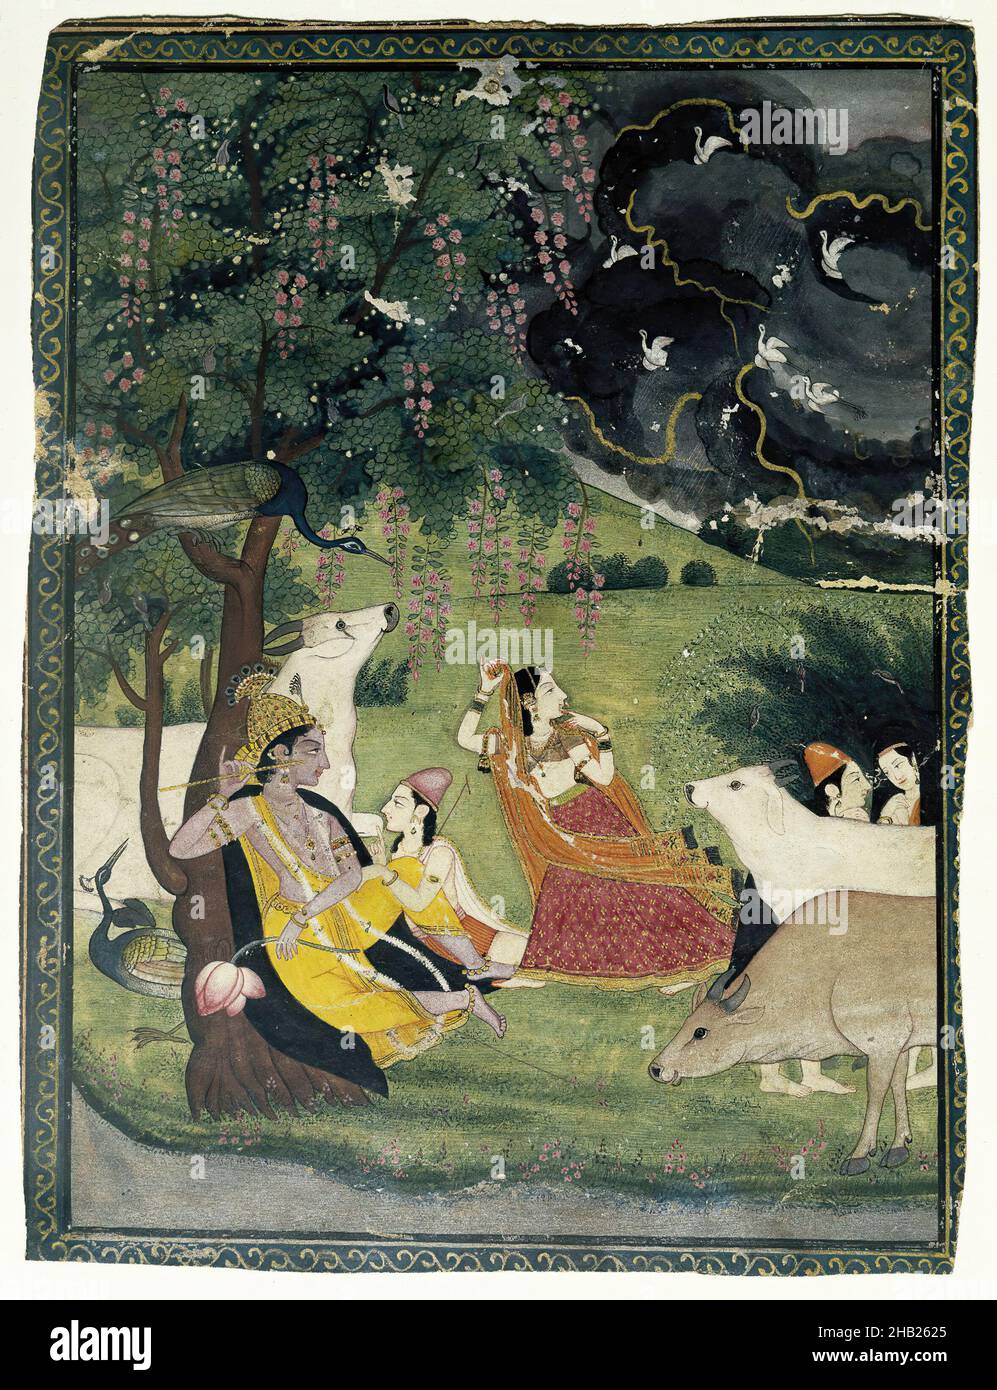 Krishna and Radha under a Tree in a Storm, Indian, Opaque watercolor and gold on paper, Kangra, Punjab Hills, India, ca. 1790-early 19th century, sheet: 9 x 6 3/4 in., 22.9 x 17.1 cm, allegory, Asian, birds, clouds, consort, cows, flower, god, Gold, Gopi, grass, green, herd, Hindu, Indian, Kangra, kneeling, krishna, love story, milkmaid, painting, Paper, peacock, Punjab Hills, radha, relaxing, sitting, storm, tree, Vaishnavism, vines, watercolor, weather Stock Photo